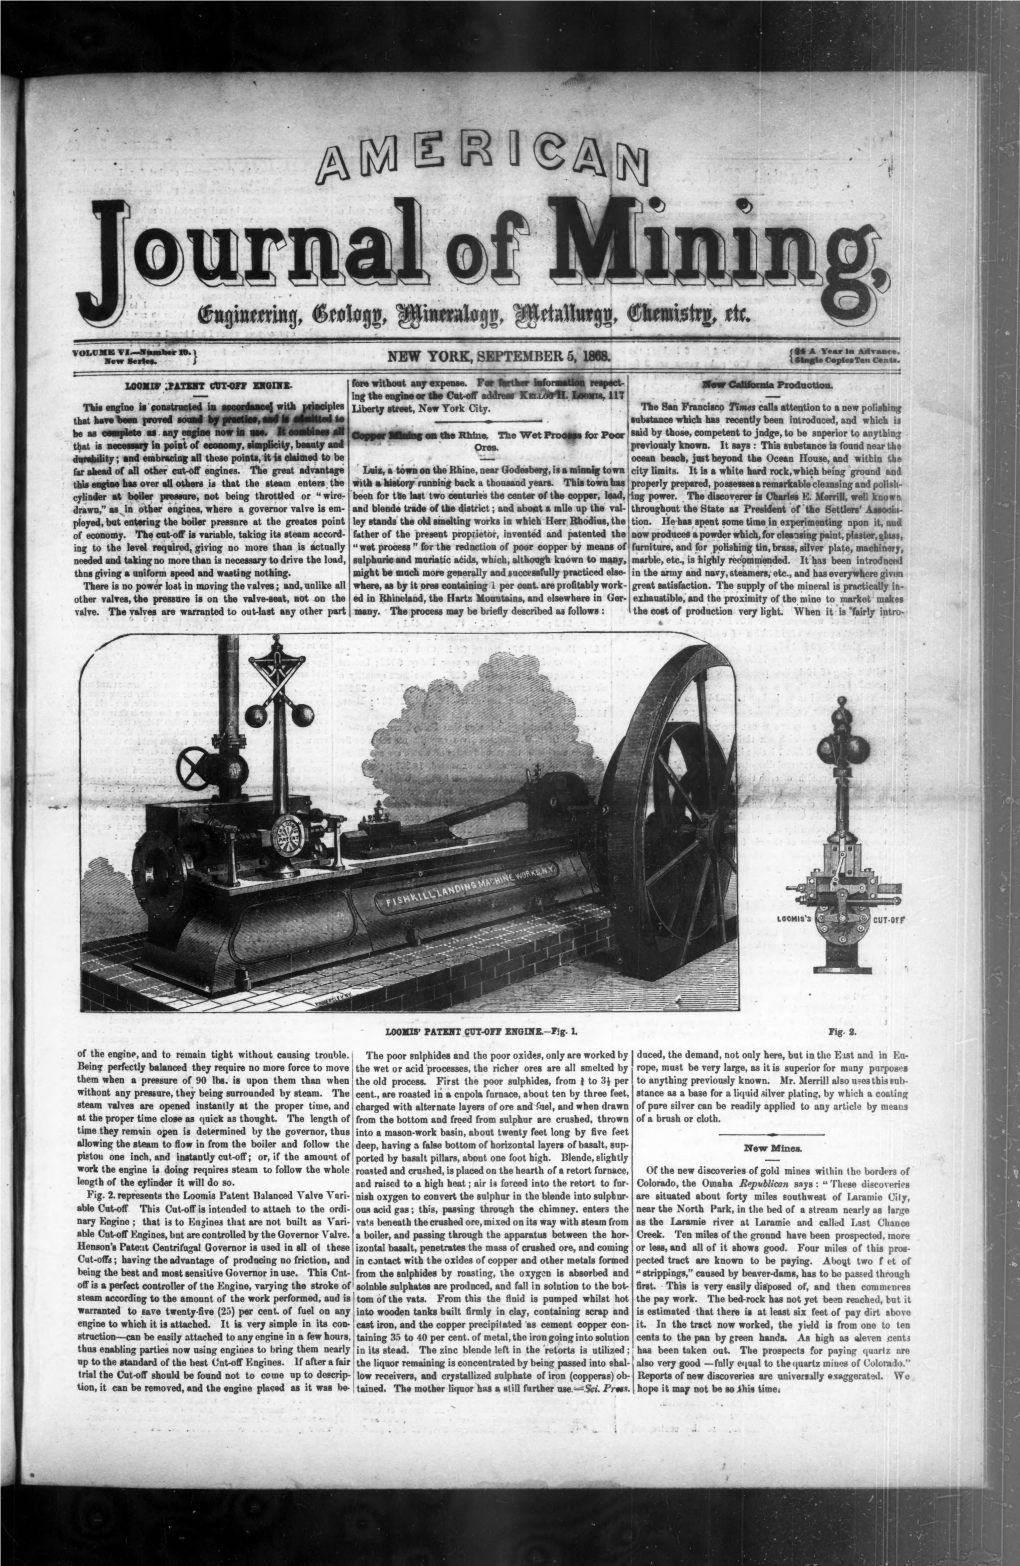 American Journal of Mining 1868-09-05: Vol 6 Iss 10